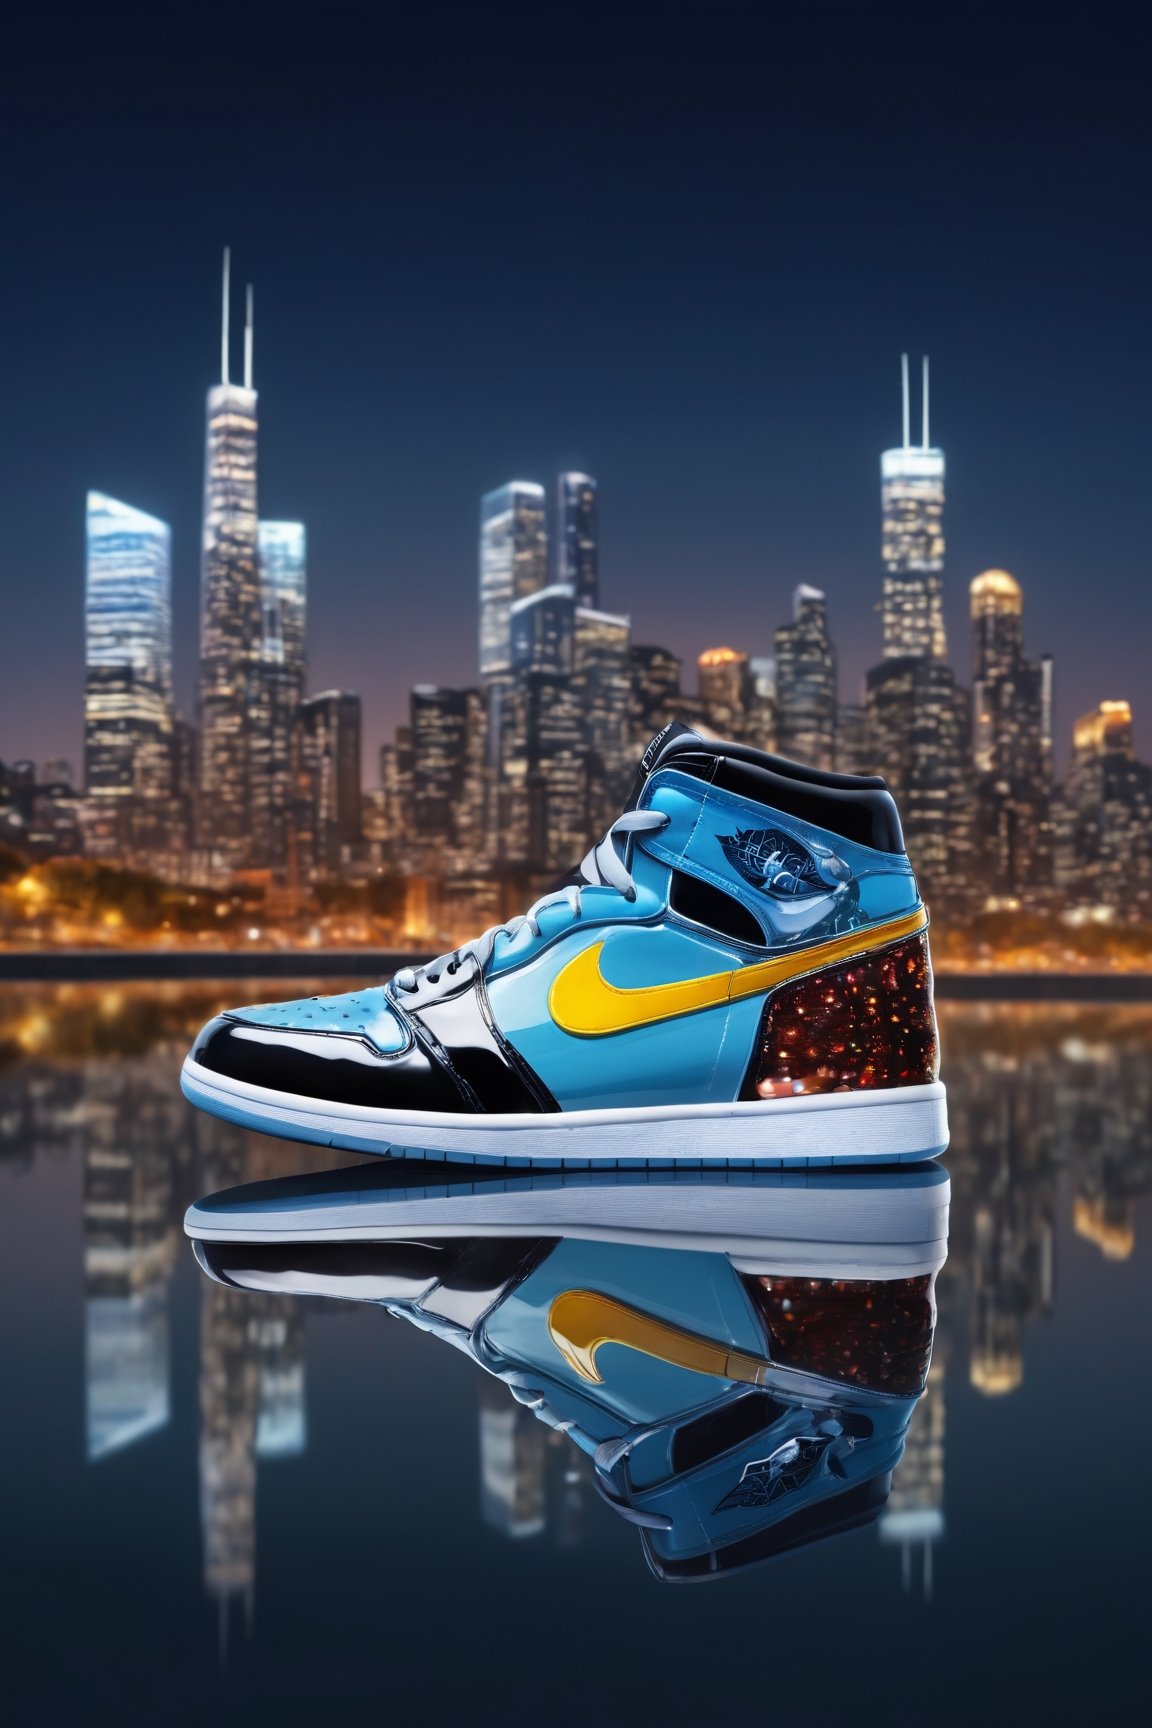 (best quality,8K,highres,masterpiece), ultra-detailed,showcasing the design concept of sneakers in an outdoor setting at night, with the sky overhead and water reflecting the city lights. The sneakers are positioned on a street, with a blurred background that includes buildings and cityscape elements, adding depth to the scene. The use of depth of field enhances the focus on the sneakers while creating a sense of immersion in the urban environment. The reflection of the sneakers on the water's surface adds visual interest and realism, contributing to the overall ambiance of the artwork. This illustration captures the fusion of style and functionality in sneaker design, set against the dynamic backdrop of a bustling city at night.